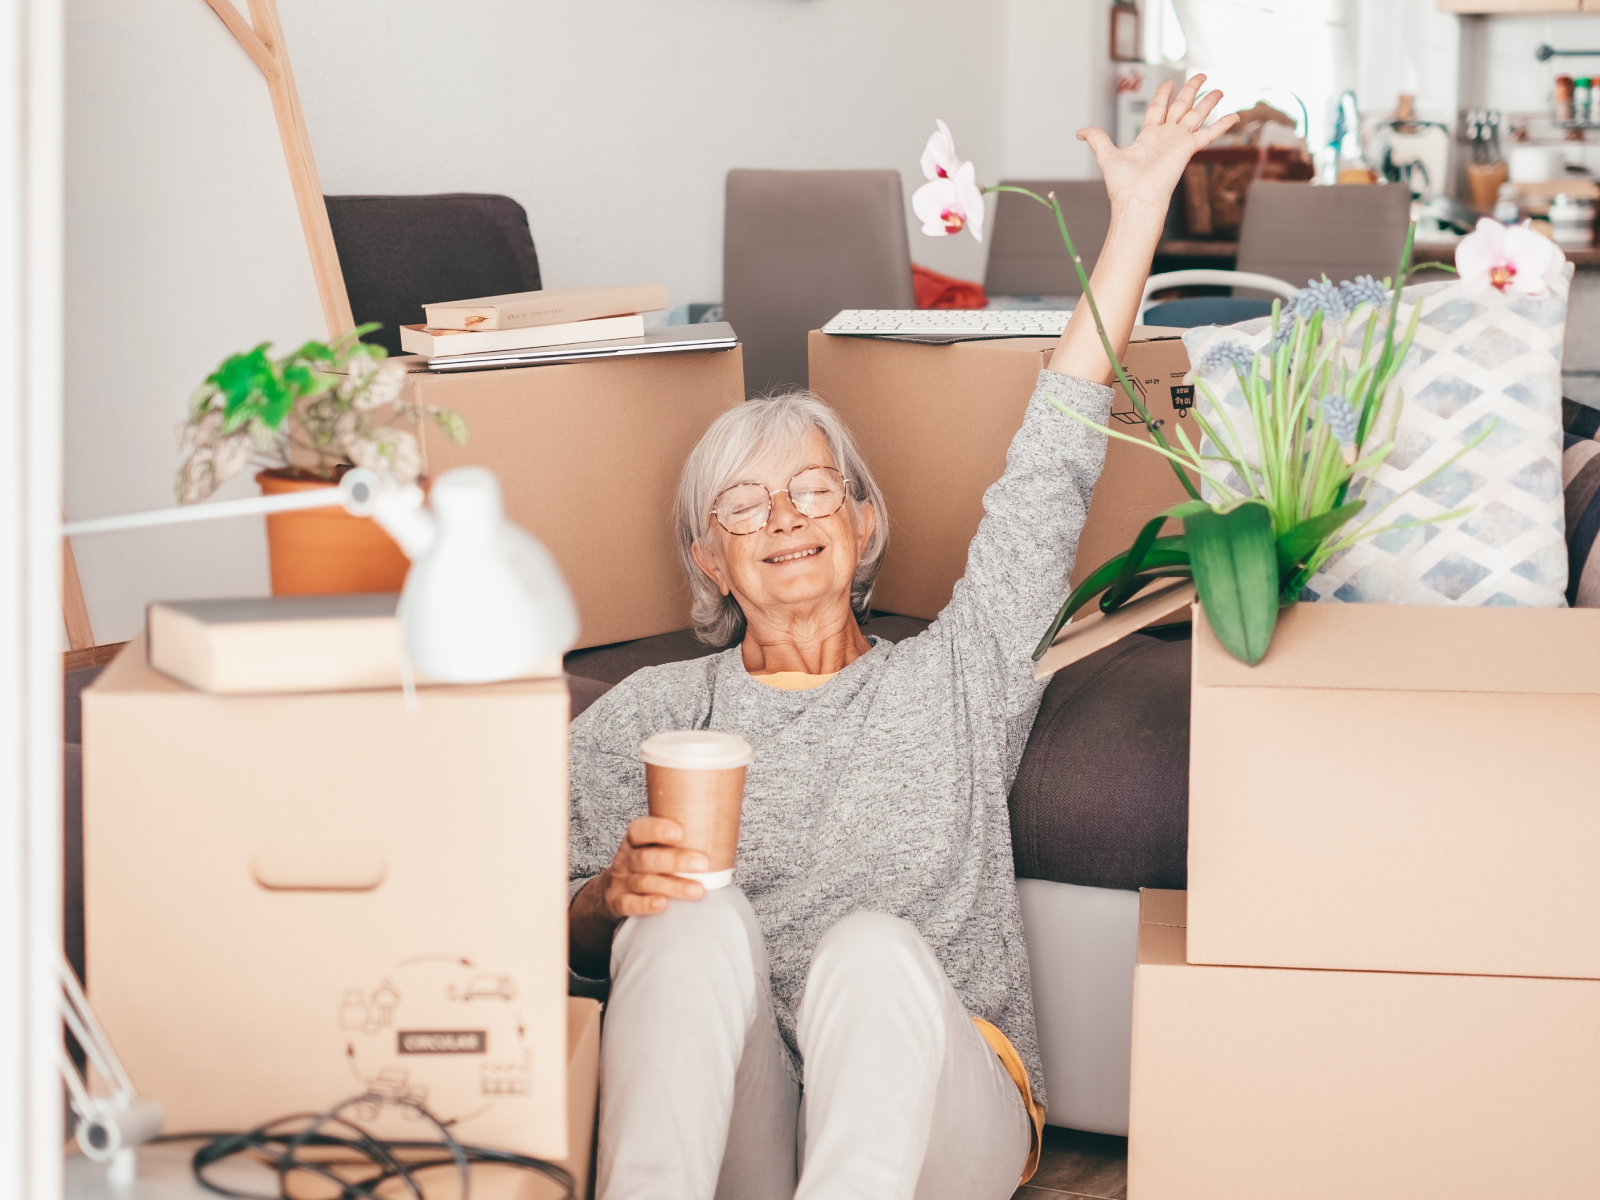 An older woman with grey hair and glasses is wearing a grey shirt and pants. She's sitting surrounded by moving boxes, with one hand in the air and another hand holding a cup of coffee.